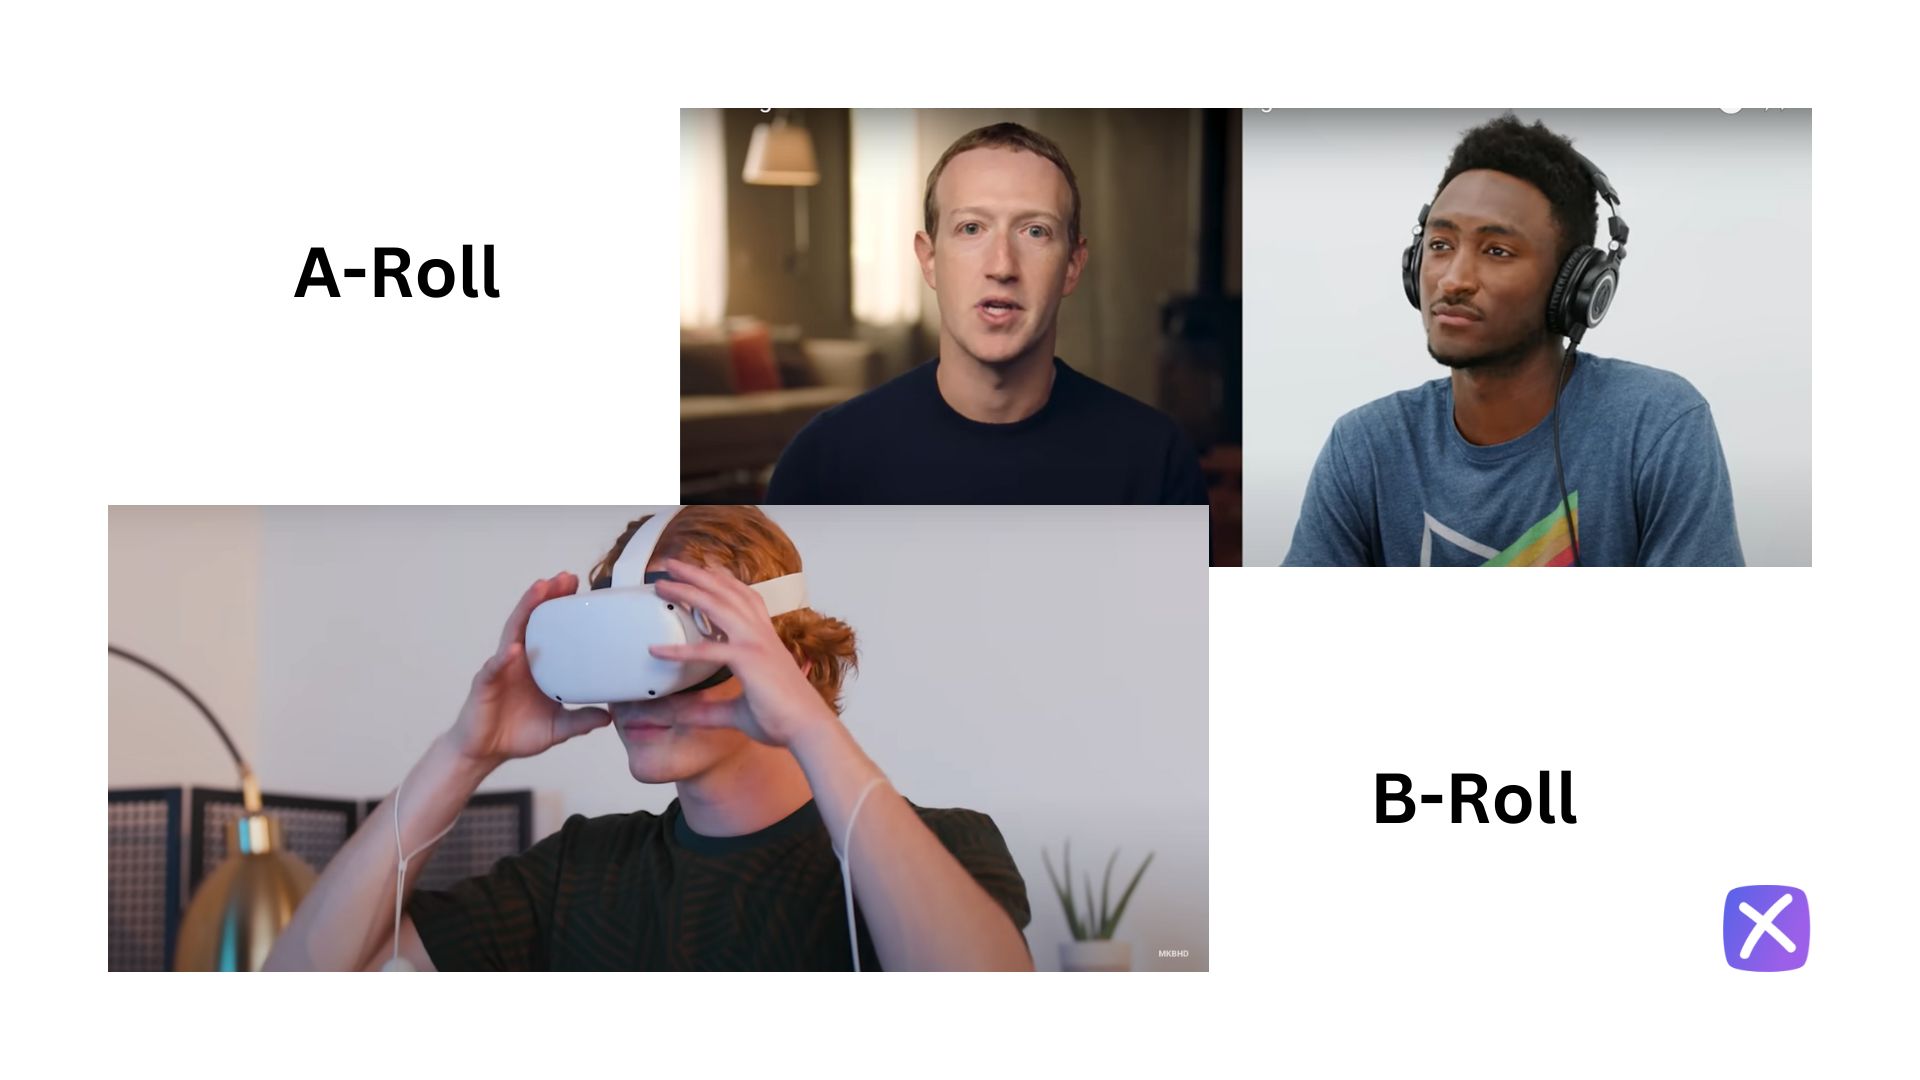 A-Roll and B-roll example from the YouTube interview with Mark Zuckerberg.